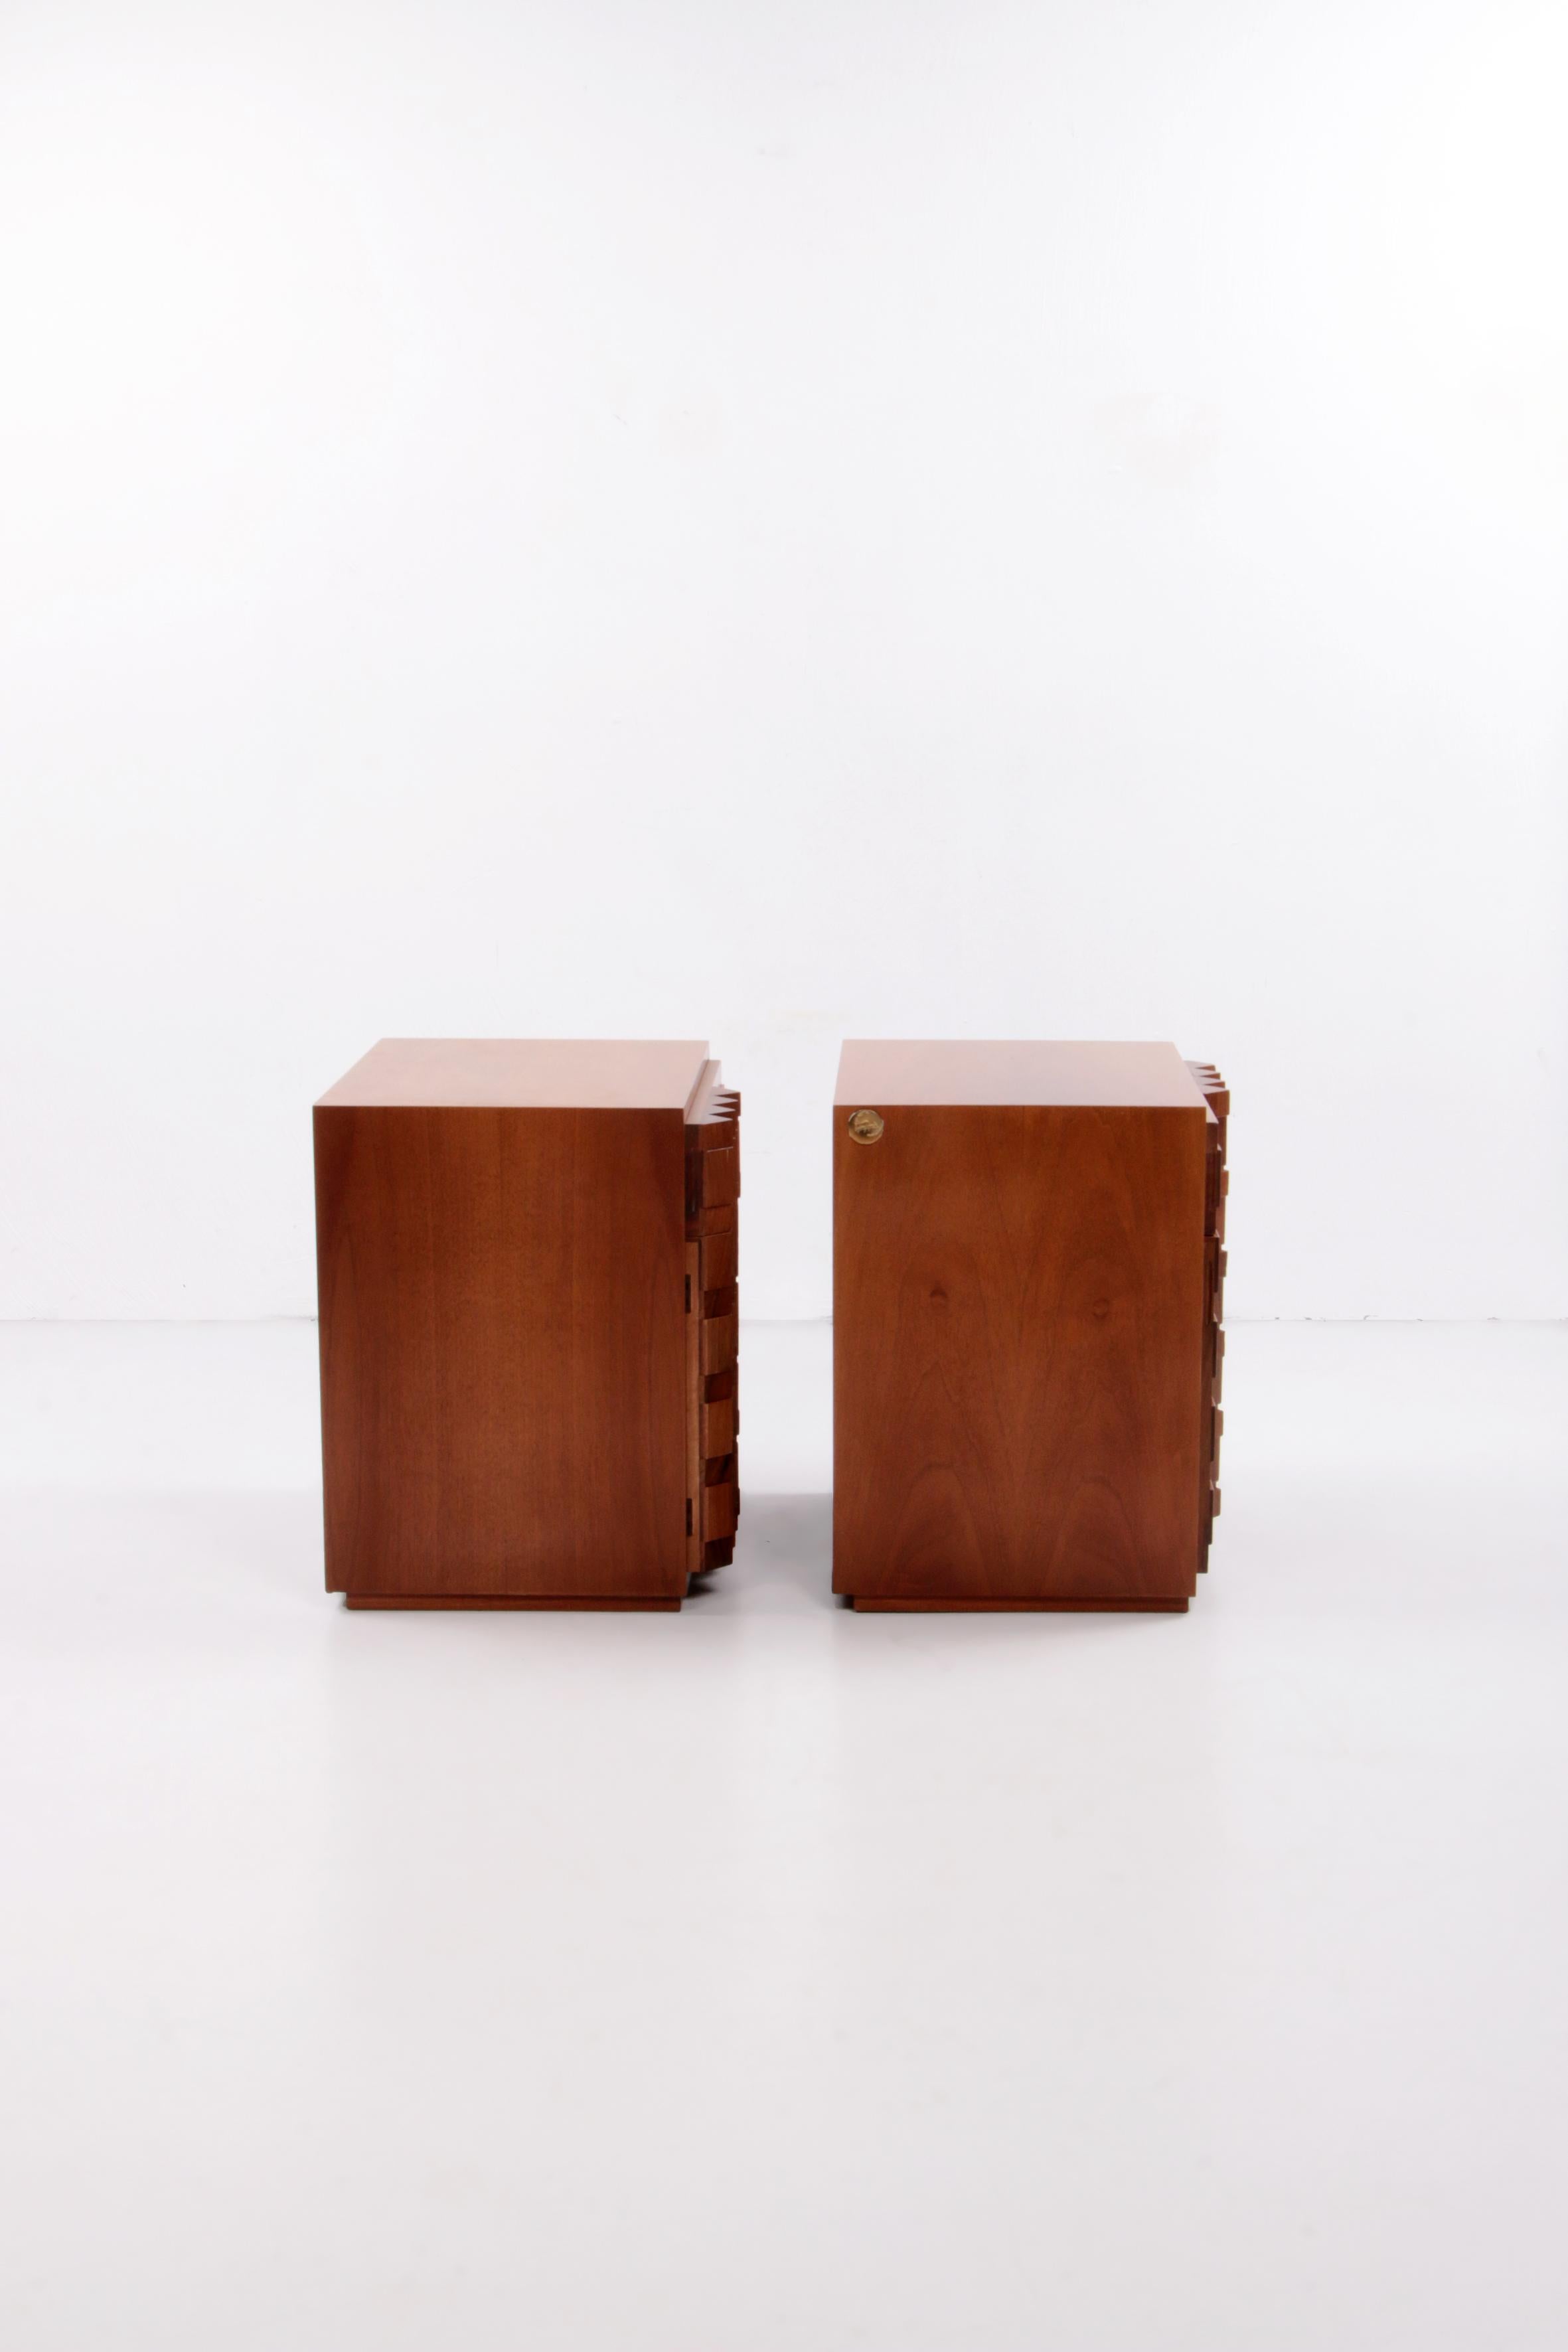 Wood Vintage Luciano Frigerio Bedside Tables with Graphic Doors, 1970s Italy. For Sale